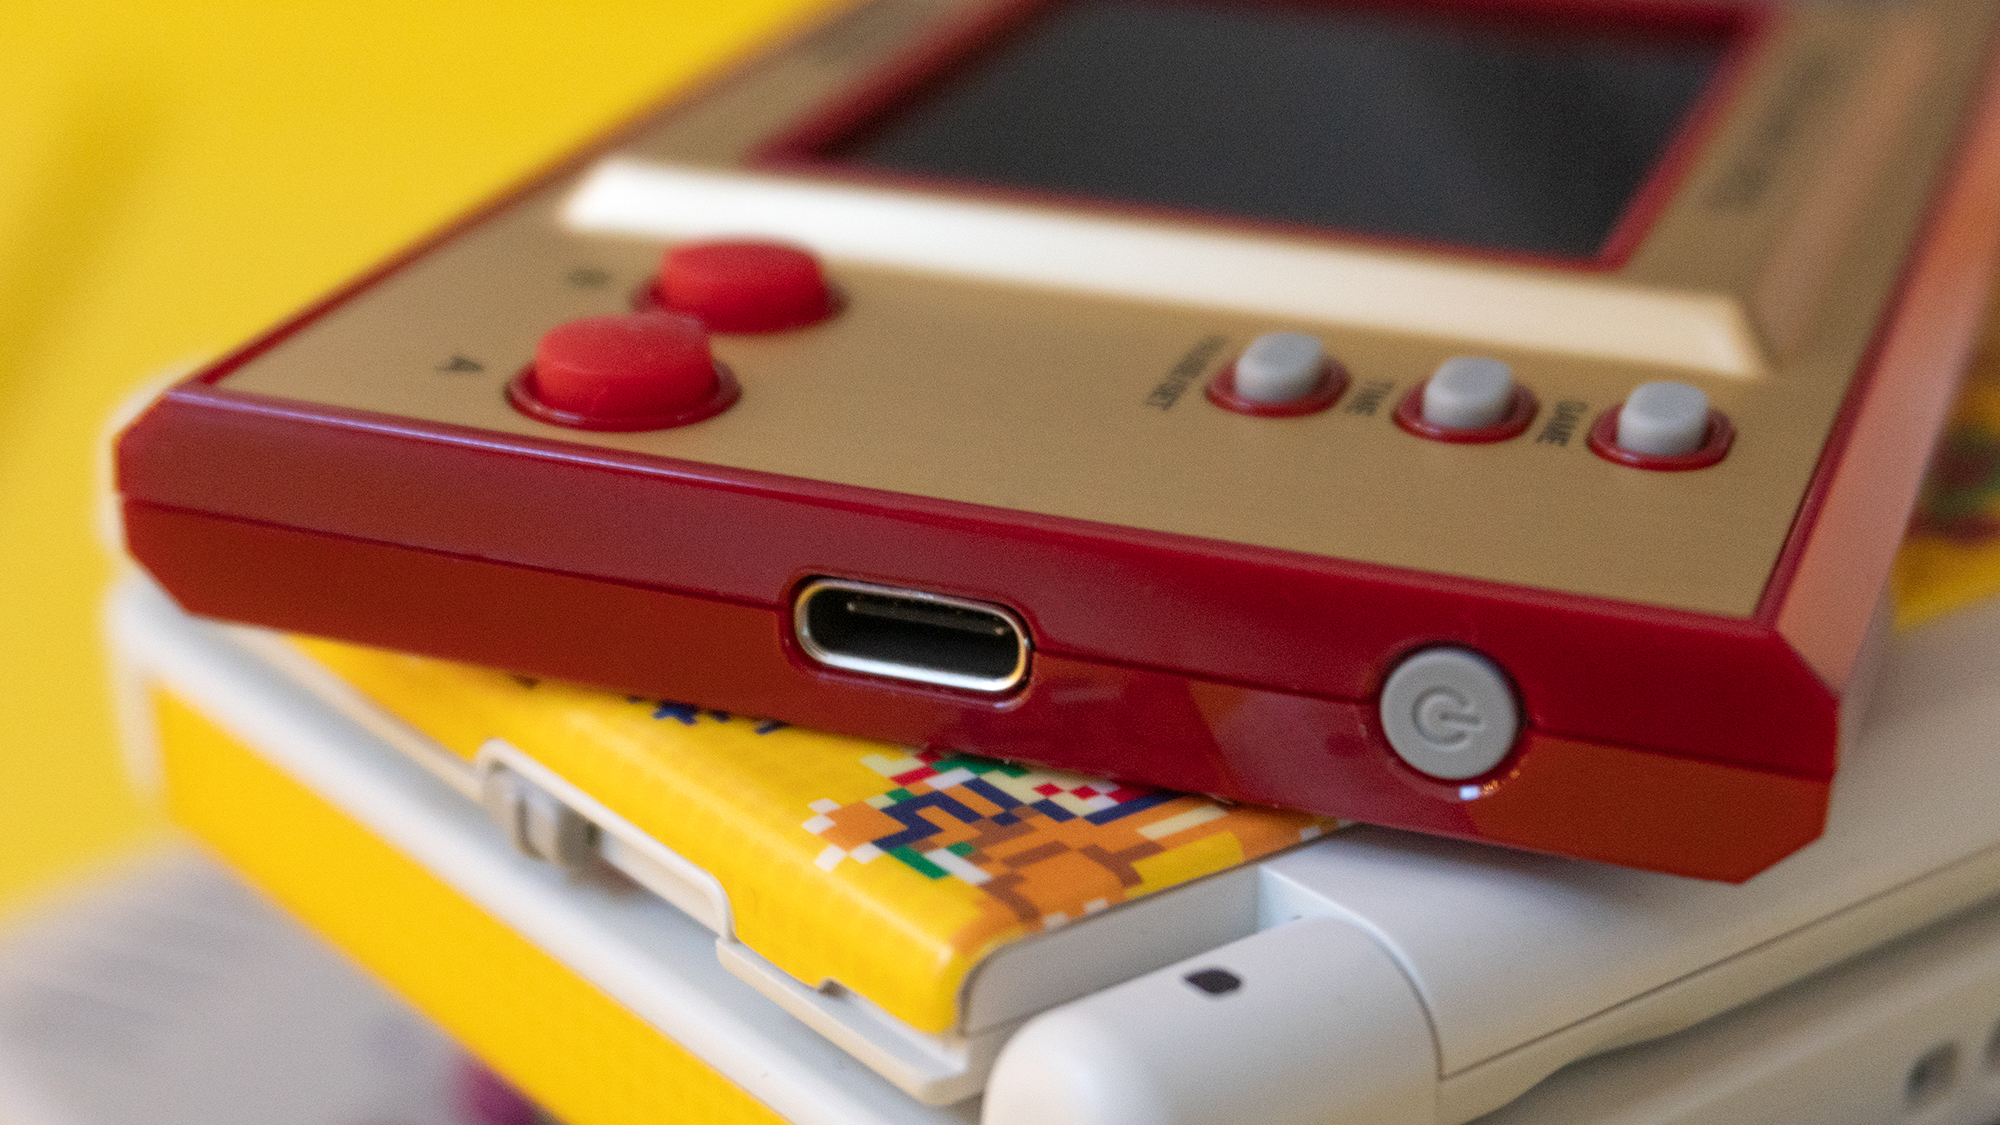 Charged over USB-C the Game & Watch's battery is good for about eight hours of playtime, depending on how bright you keep the screen. (Photo: Andrew Liszewski - Gizmodo)